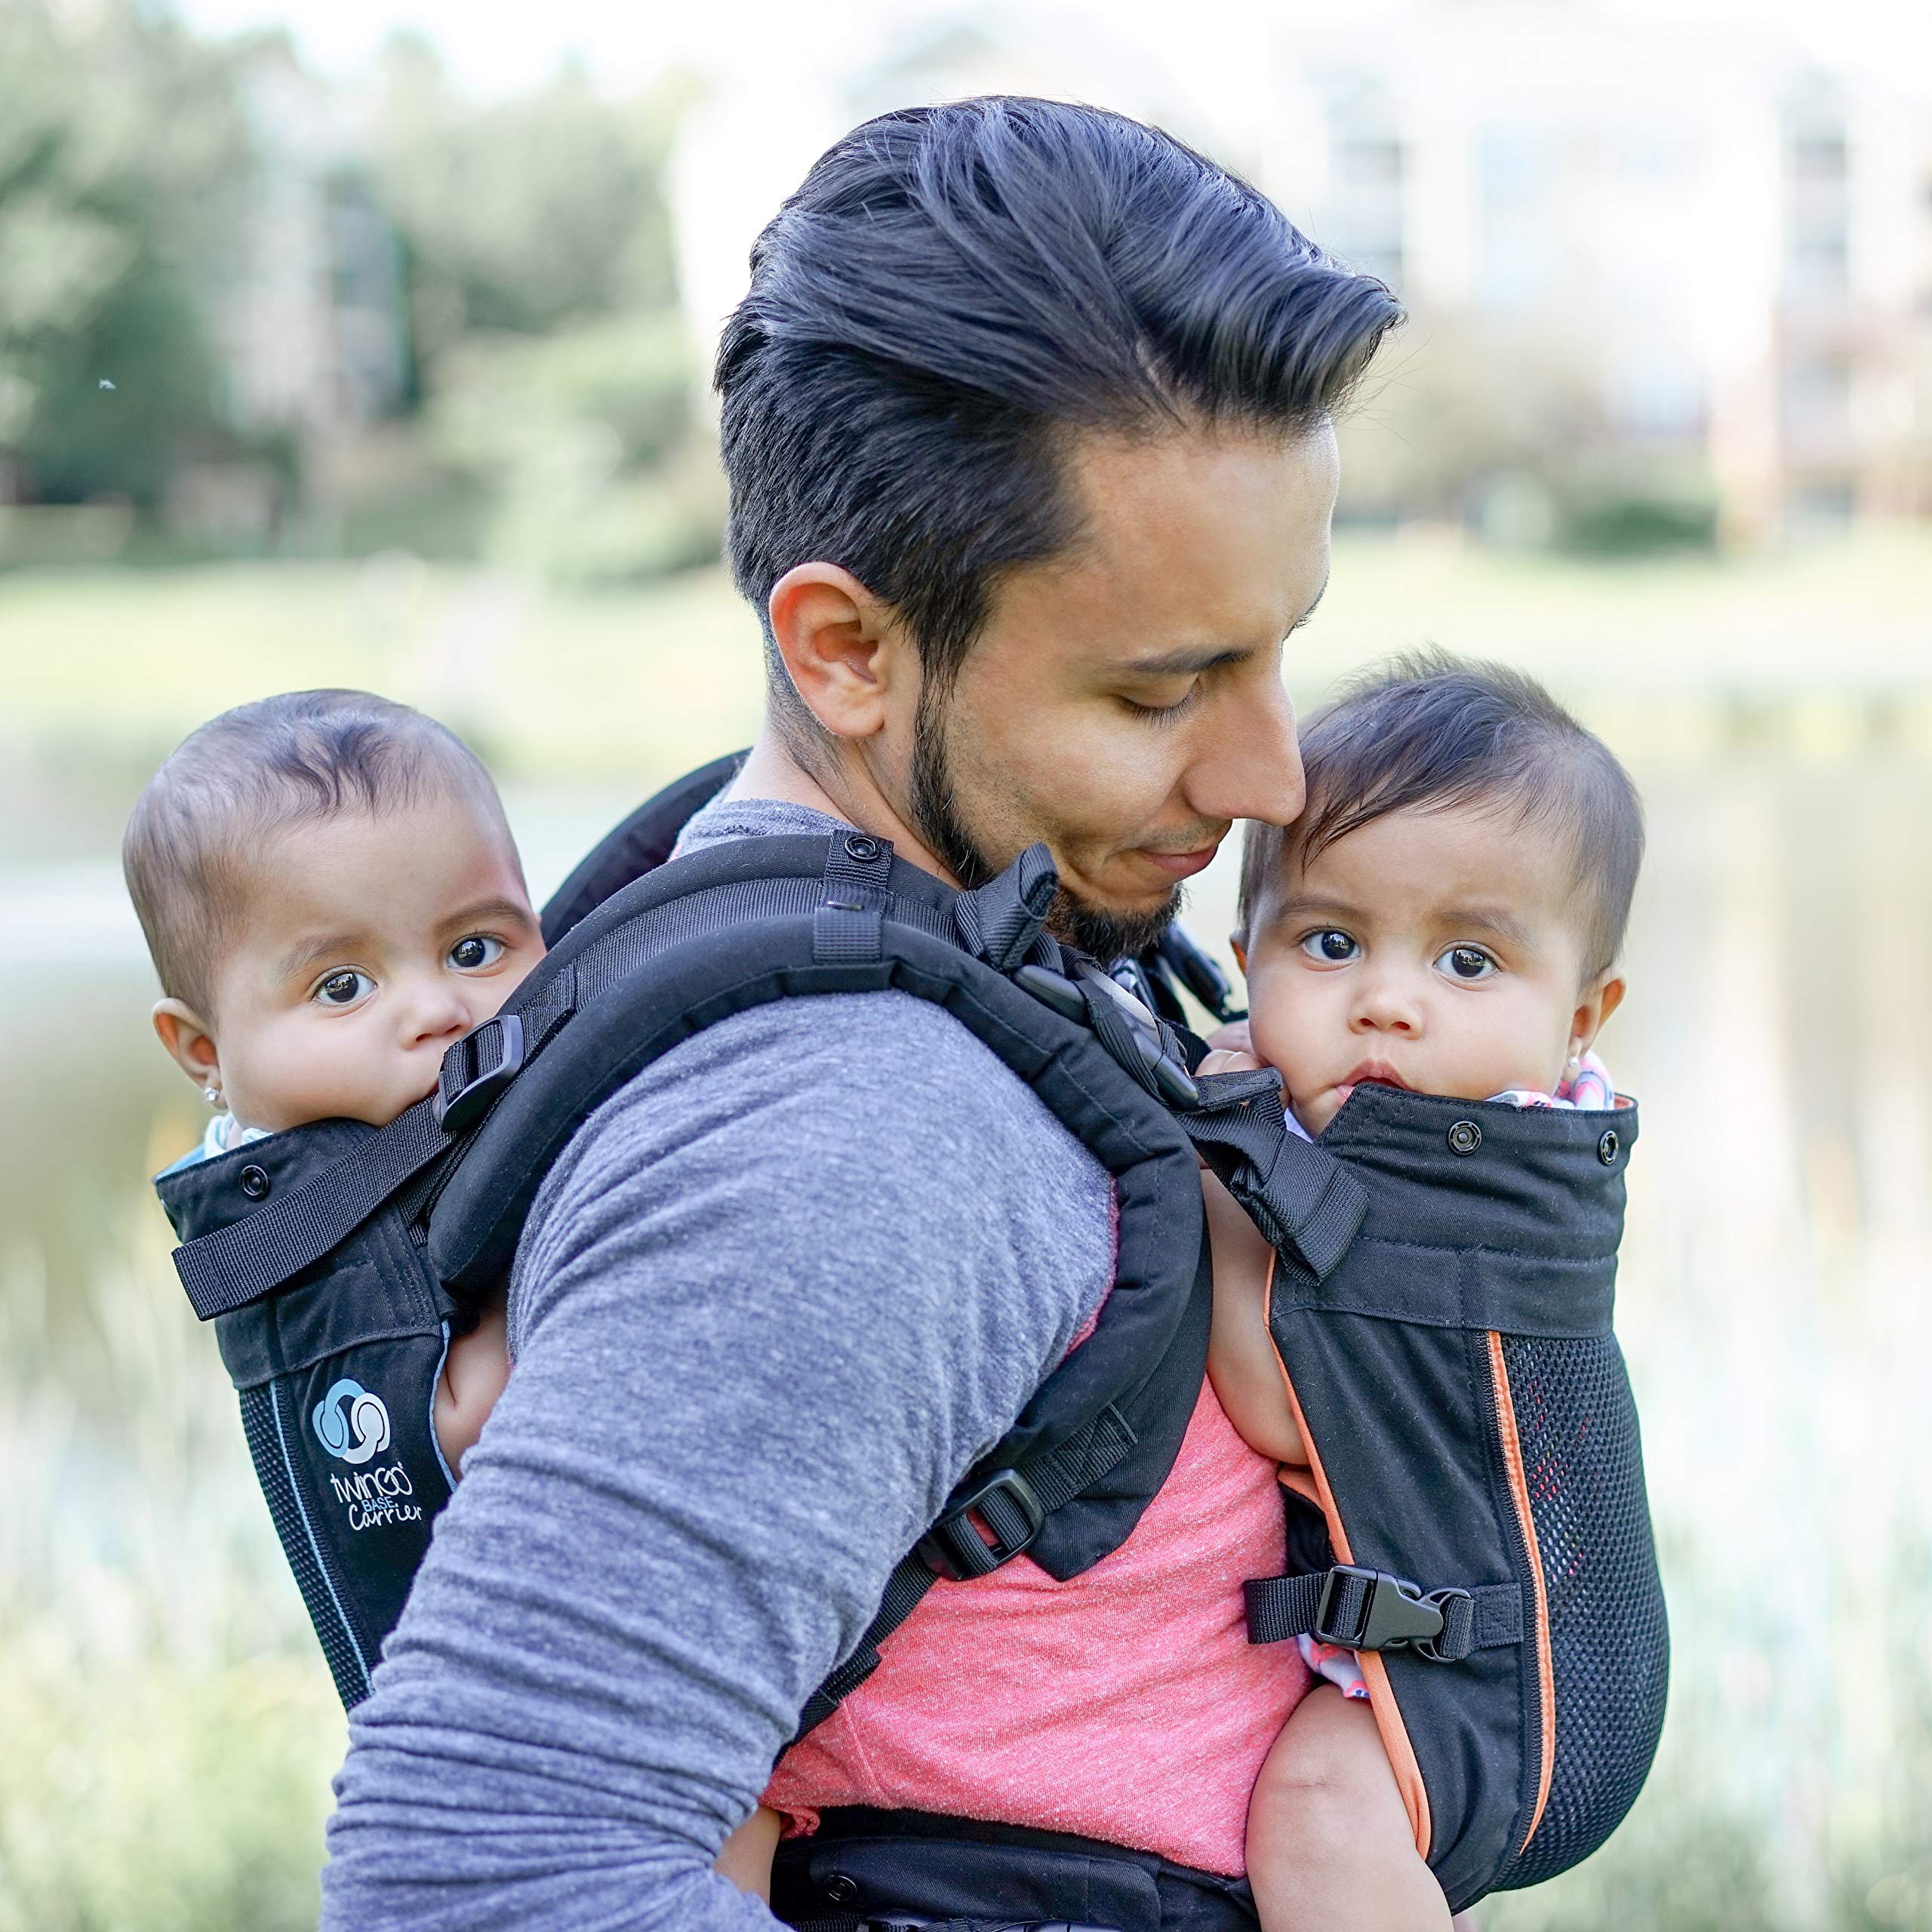 TwinGo Carrier - Air Model - Classic Black - Great for All Seasons - Breathable Mesh - Fully Adjustable Tandem or 2 Single Baby Carrier for Men, Woman, Twins and Babies 10-45 lbs